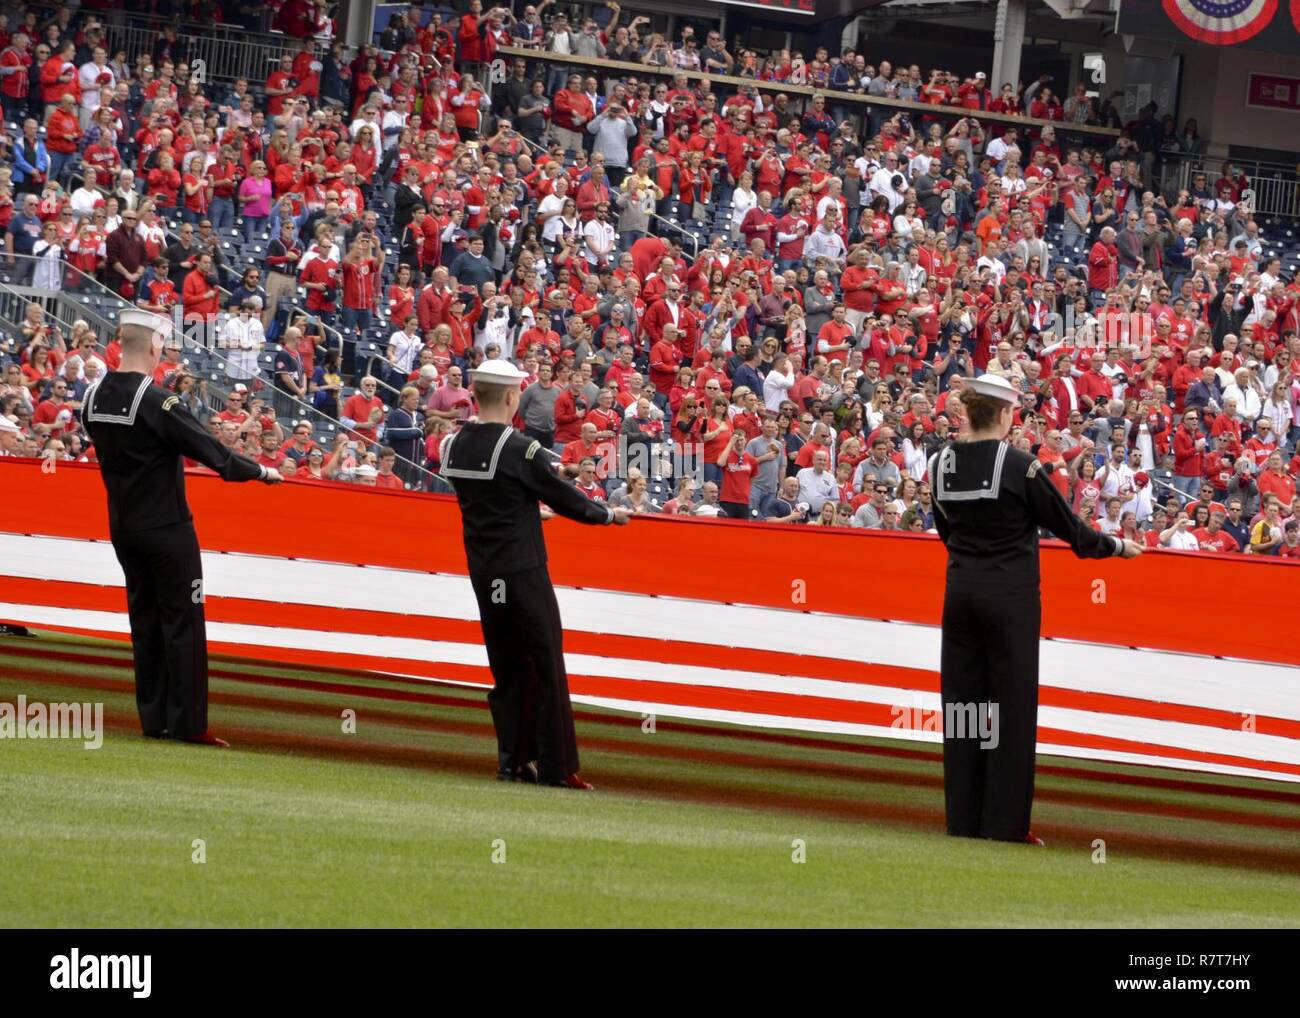 WASHINGTON (April. 3, 2017) Sailors assigned to the U.S. Navy Ceremonial Guard take part in an opening day ceremony during a Washington Nationals baseball game. Stock Photo